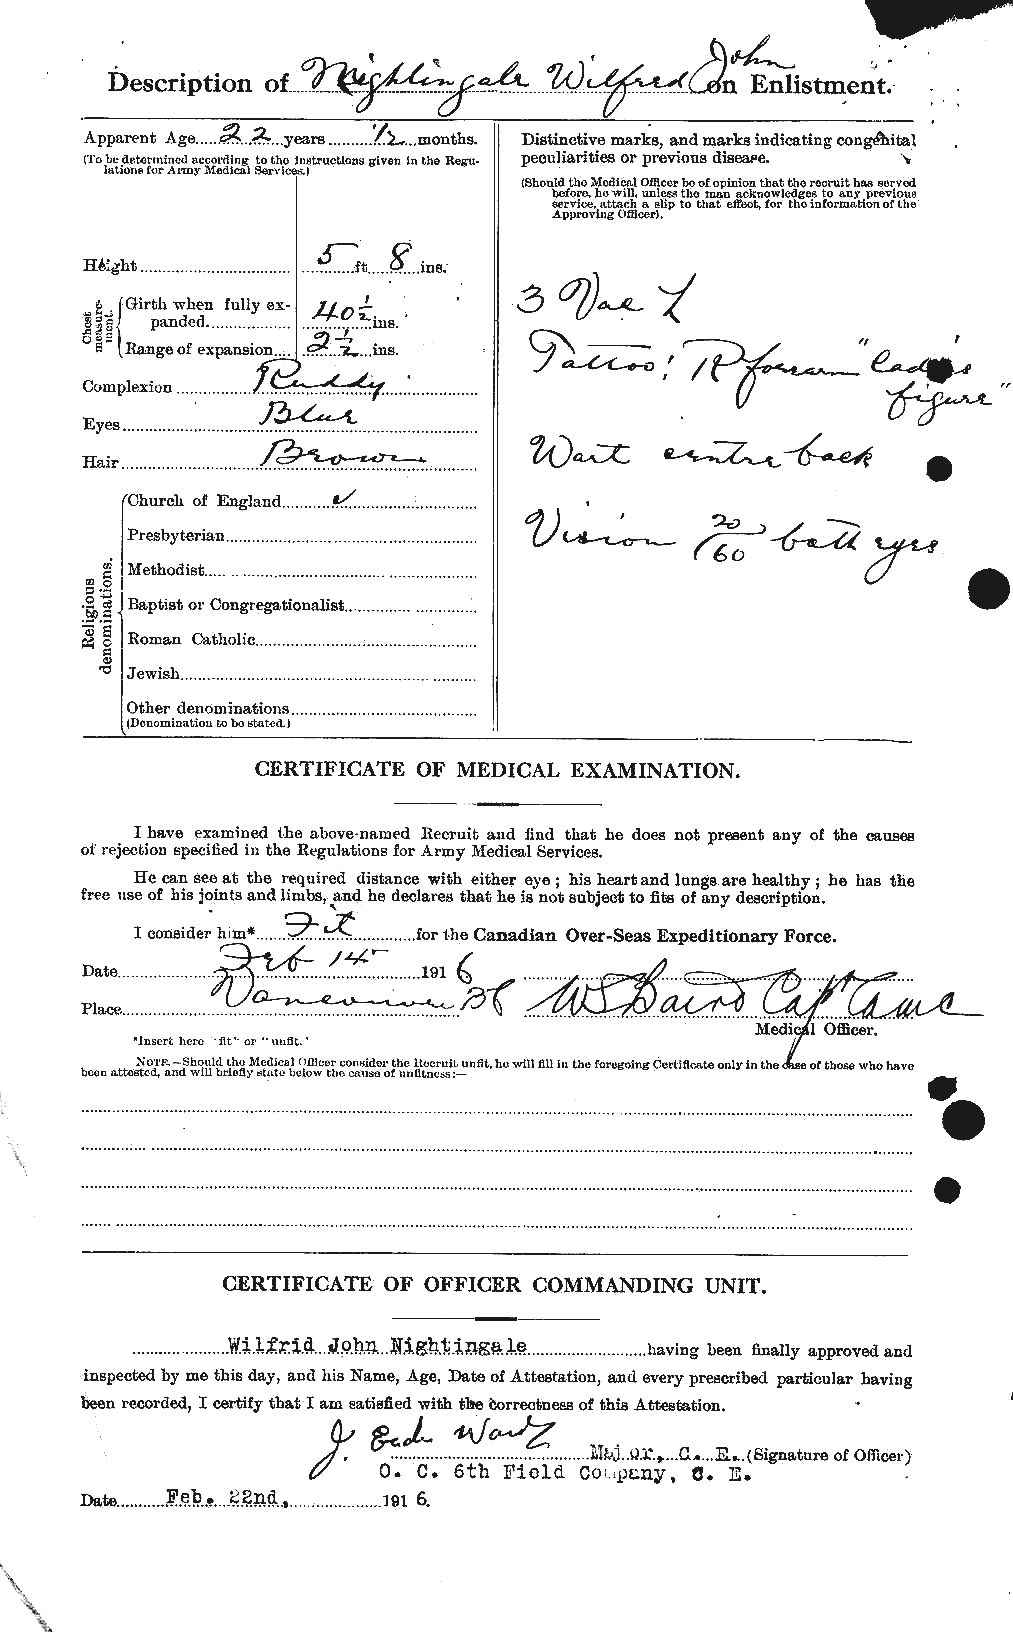 Personnel Records of the First World War - CEF 555221b